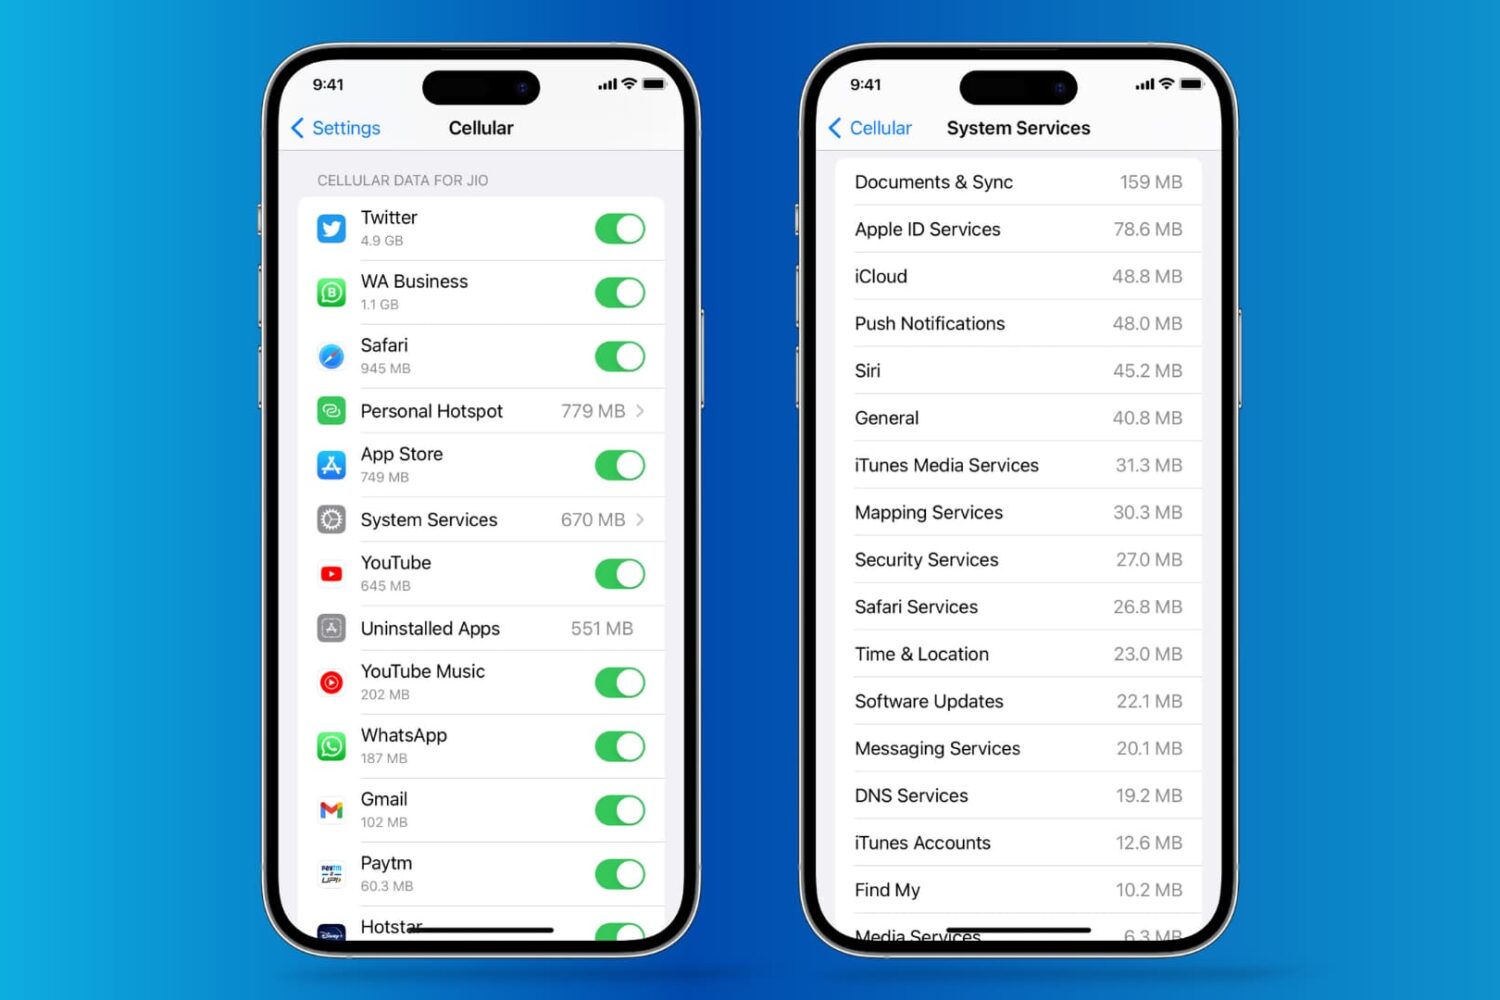 Cellular data used by each app and system service on iPhone